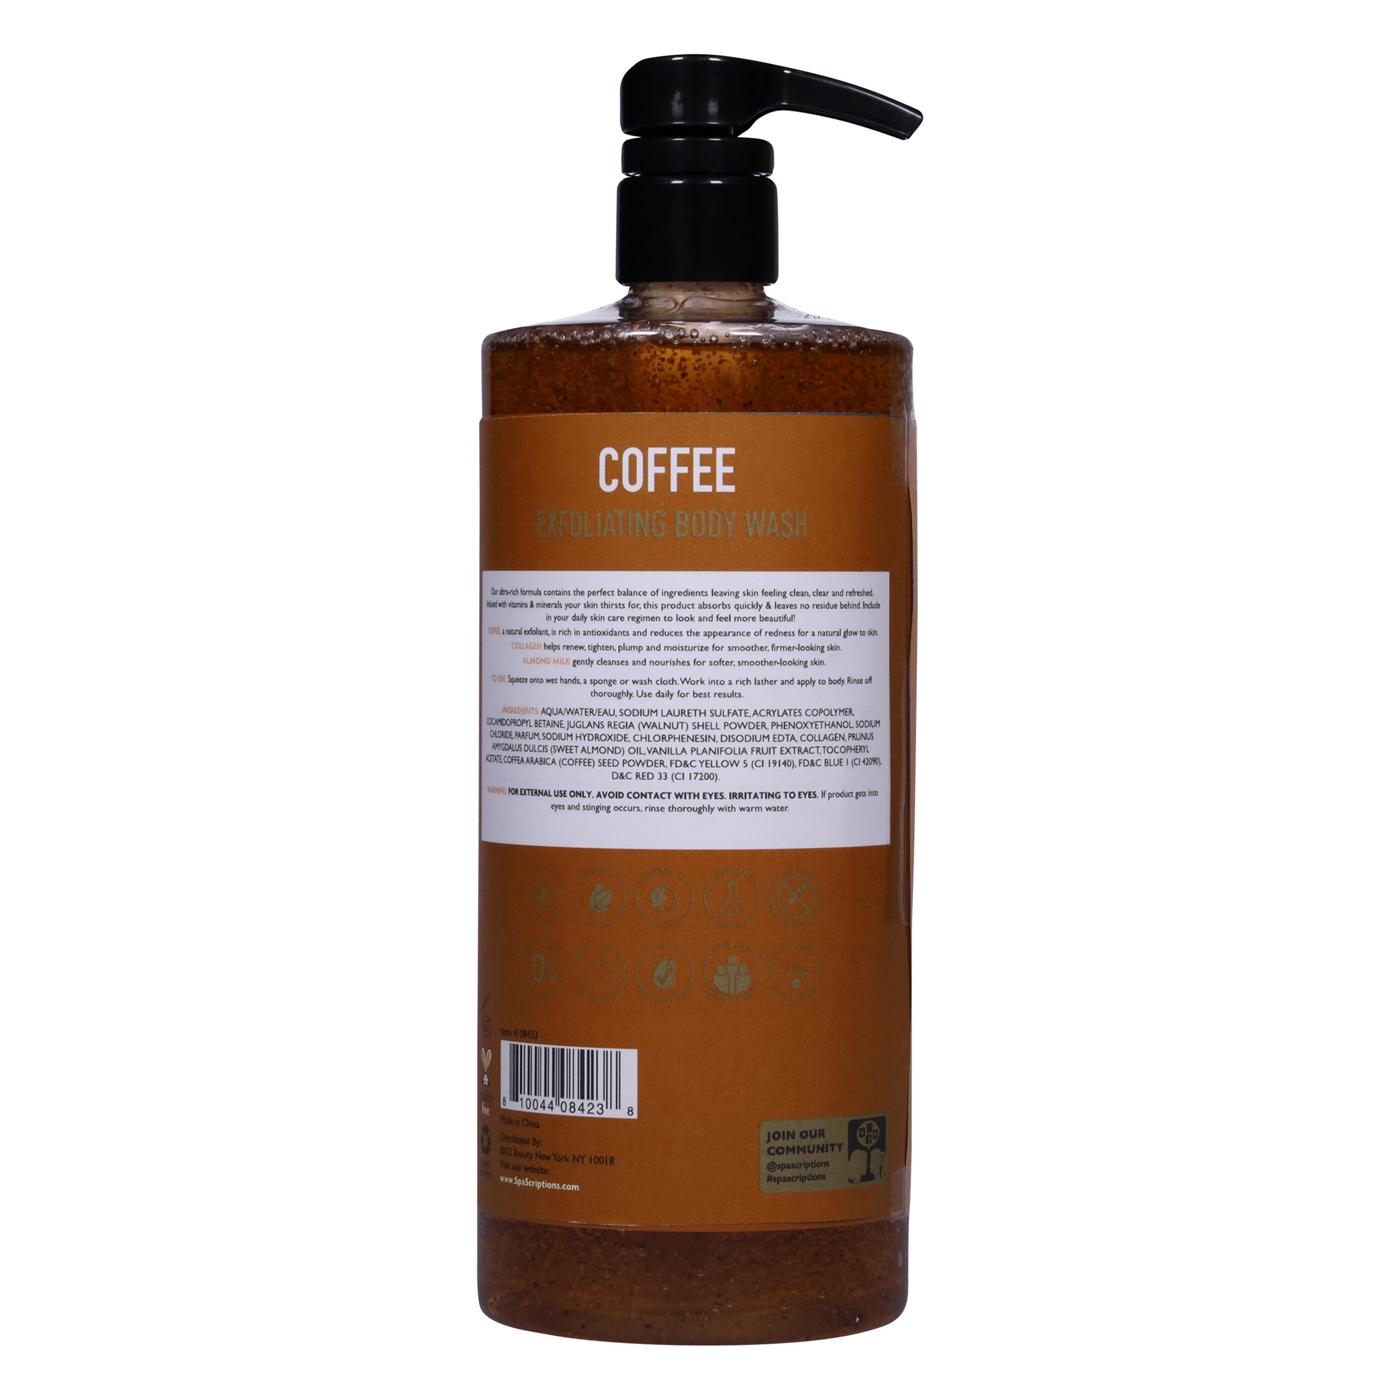 SpaScriptions Exfoliating Body Wash - Coffee; image 2 of 2